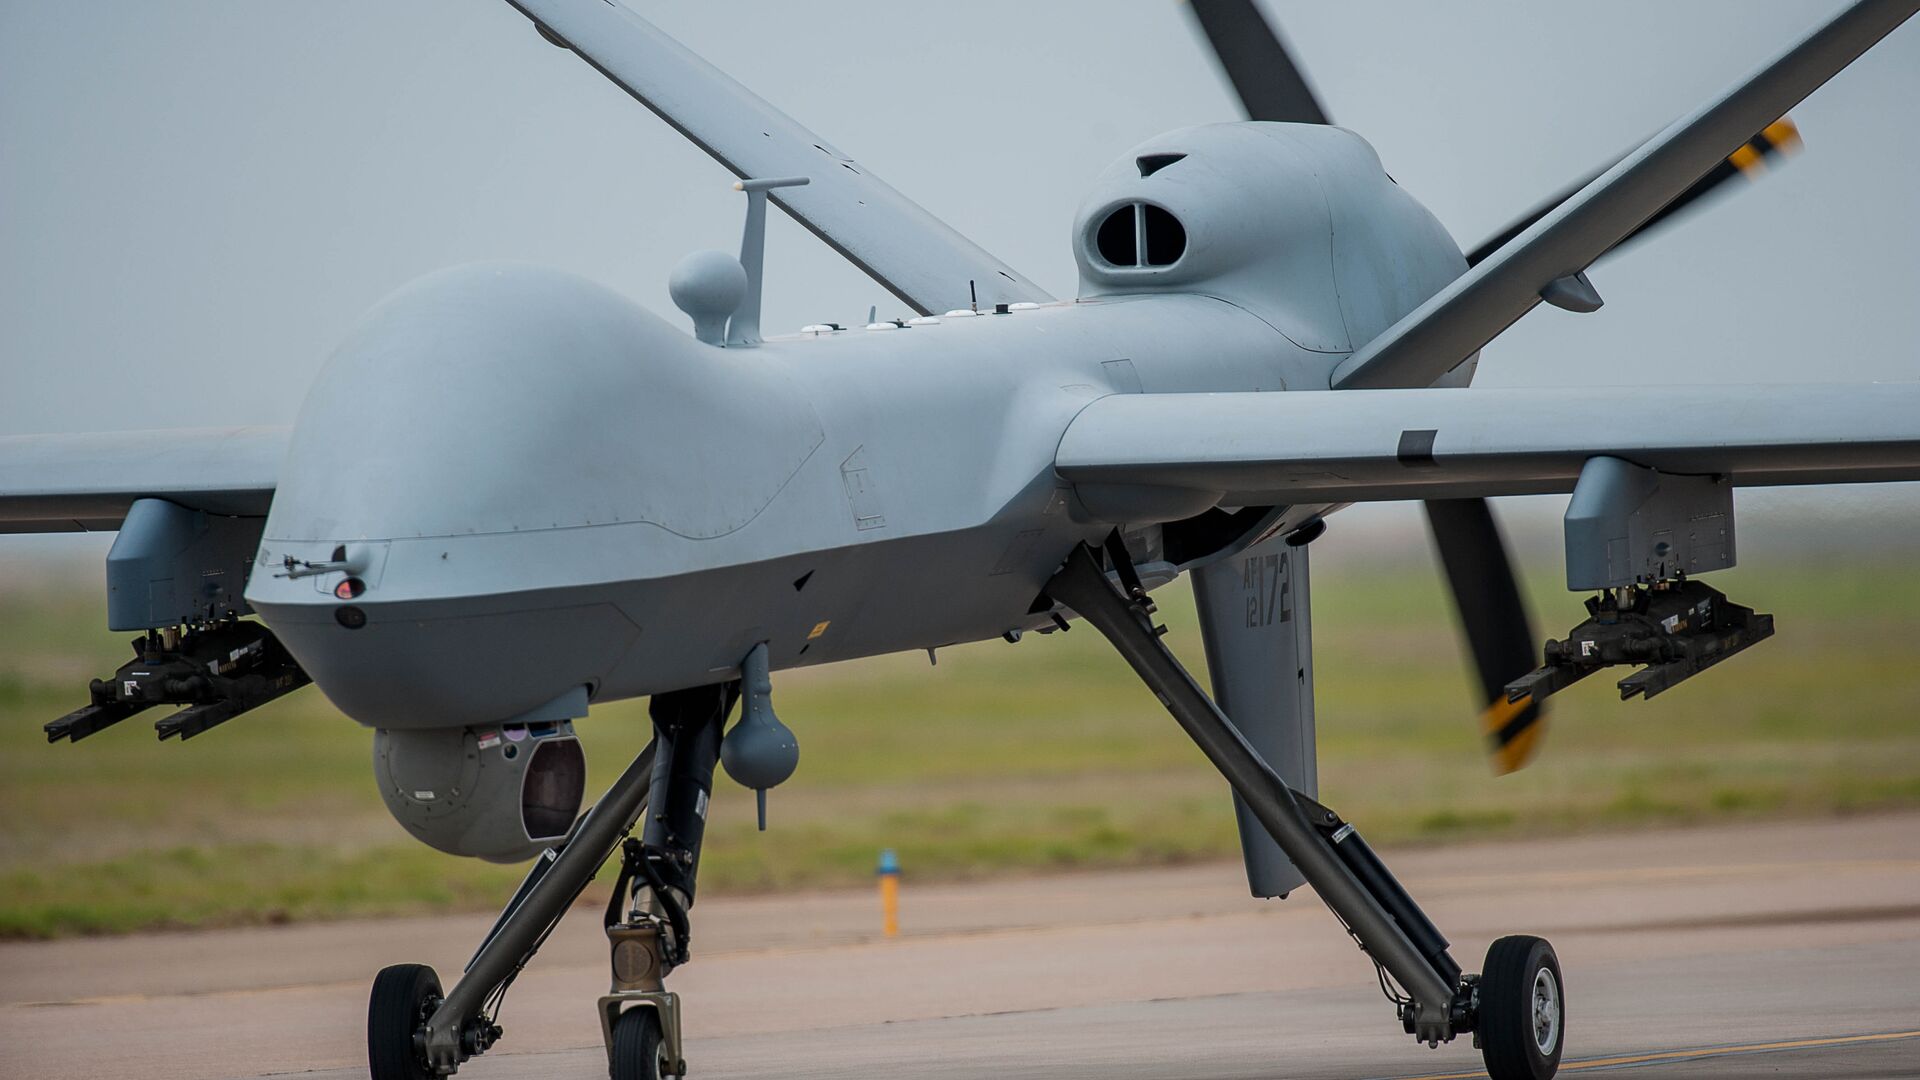 A US Air Force MQ9 “Reaper” drone made an emergency landing in northwestern Poland